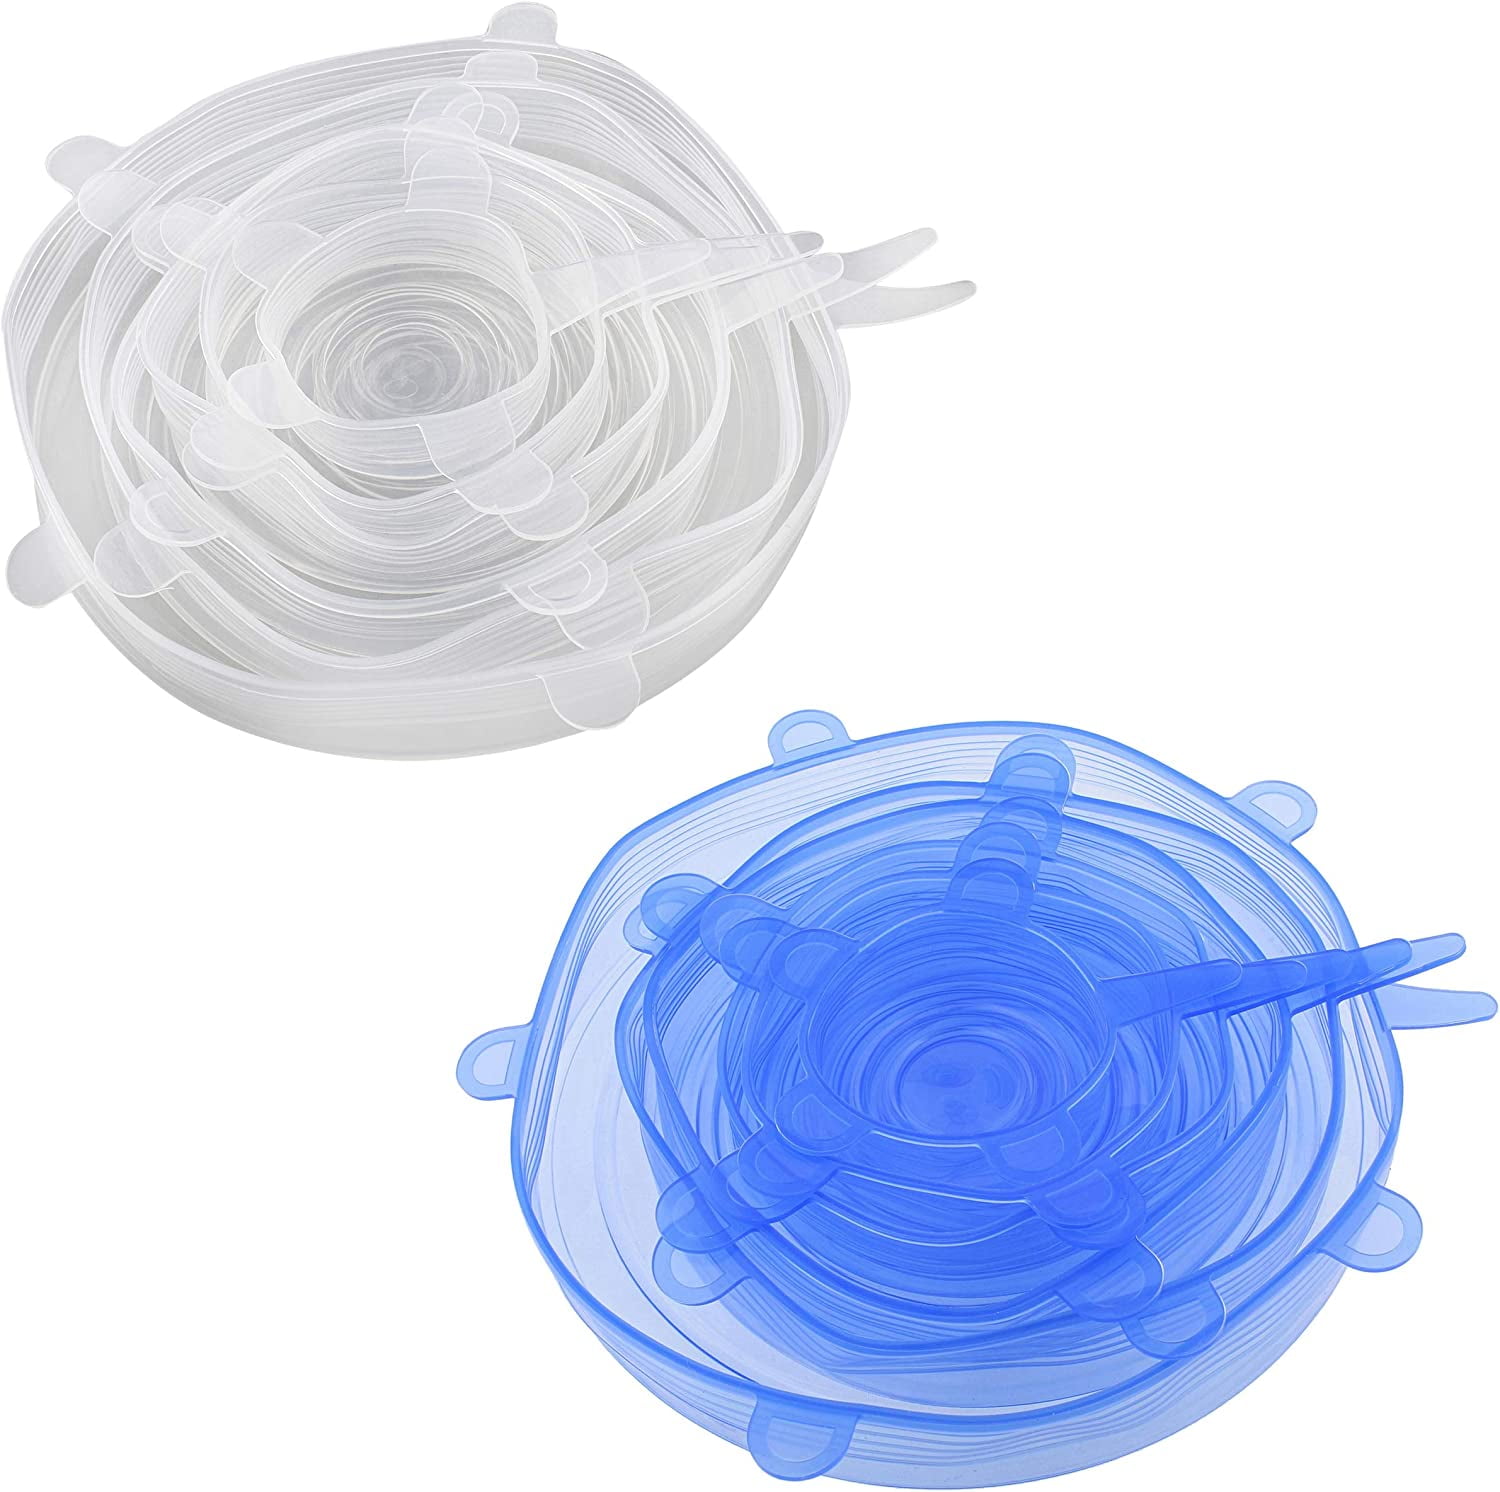 8pc set 2.6 & 3.7 BPA Free, Food Safe, Reusable Silicone Stretch Lids,  Jars & Small Fruits Covers